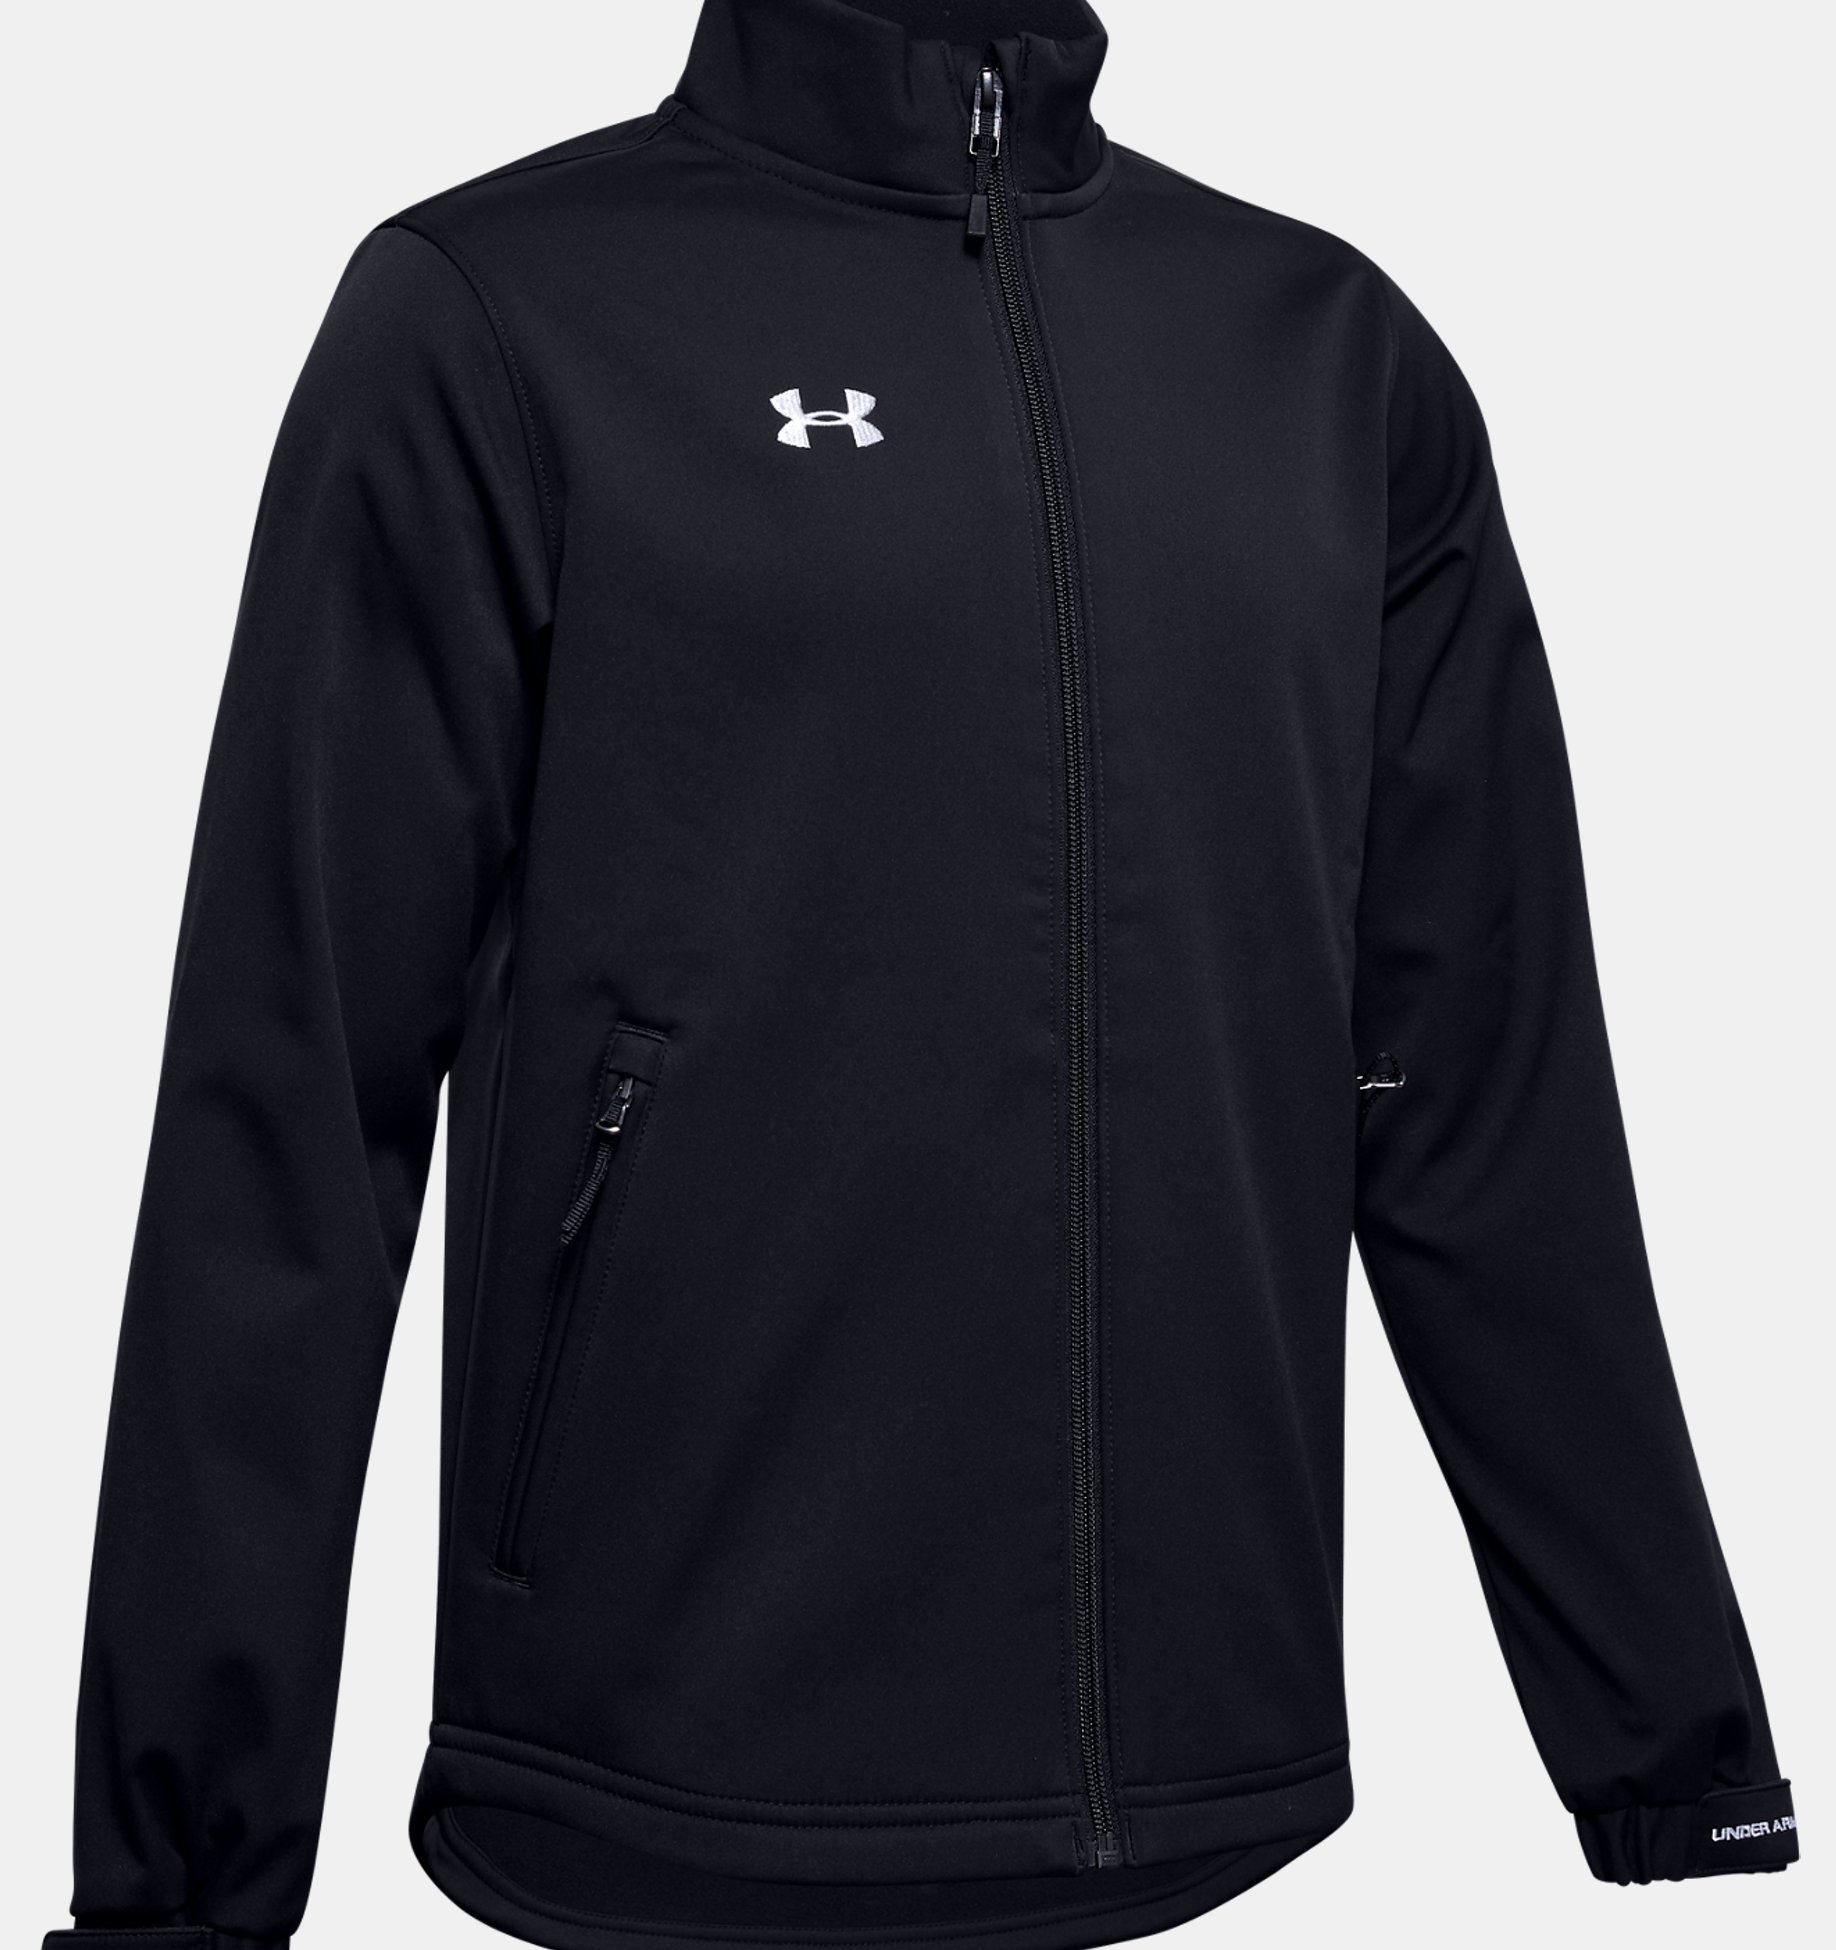 NWT Details about   Under Armour Boys Softshell Jacket 